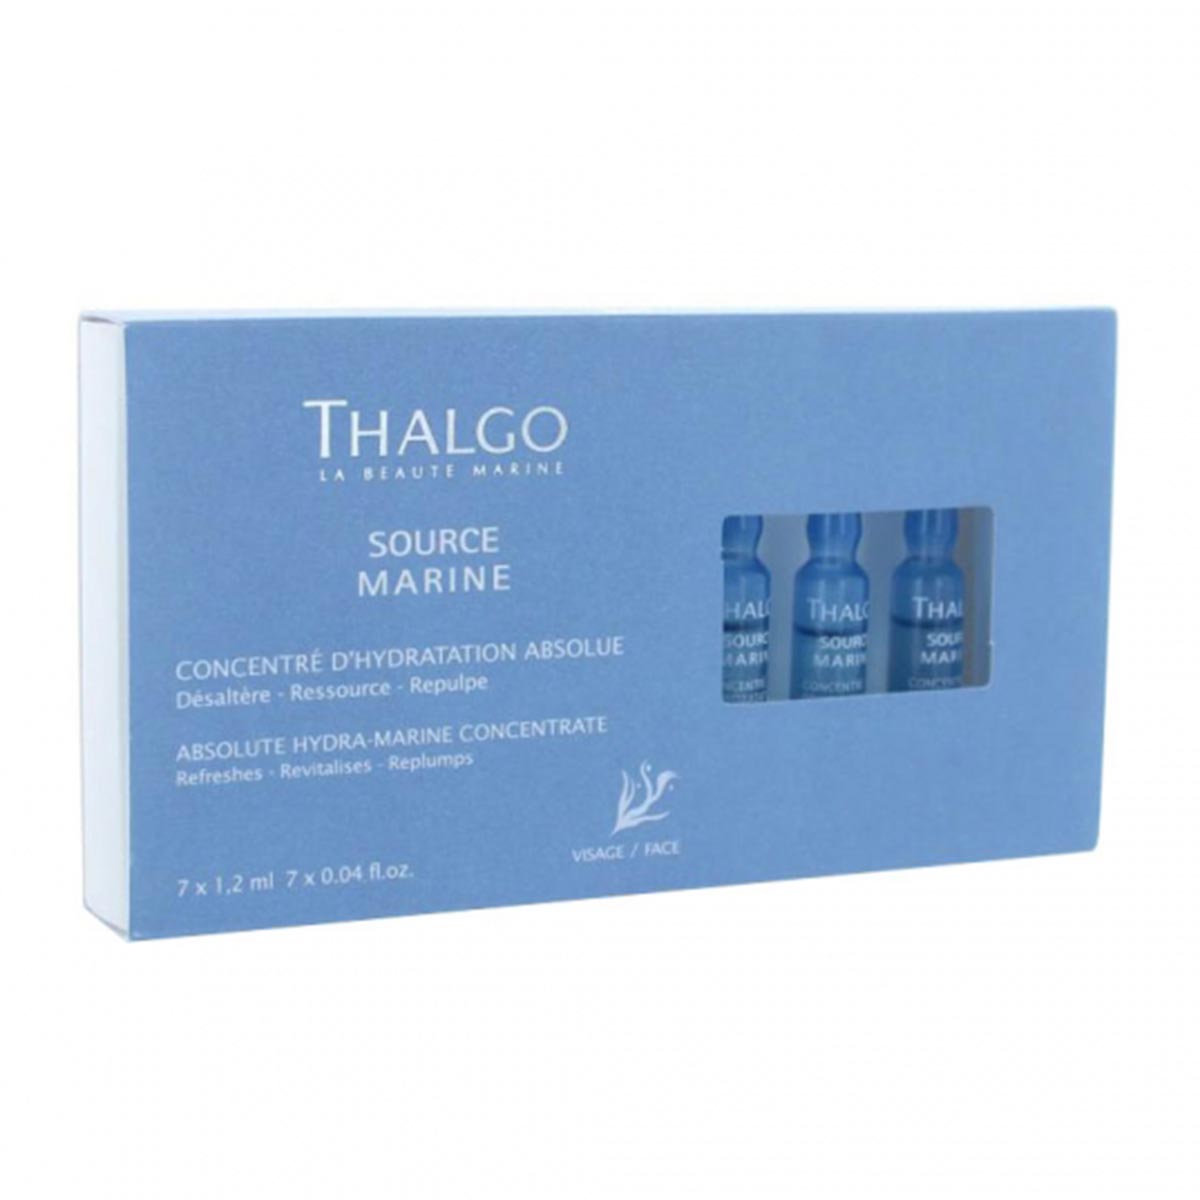 Image of Thalgo Source Marine Absolute Hydramarine Concentrate 7 x 1,2ml